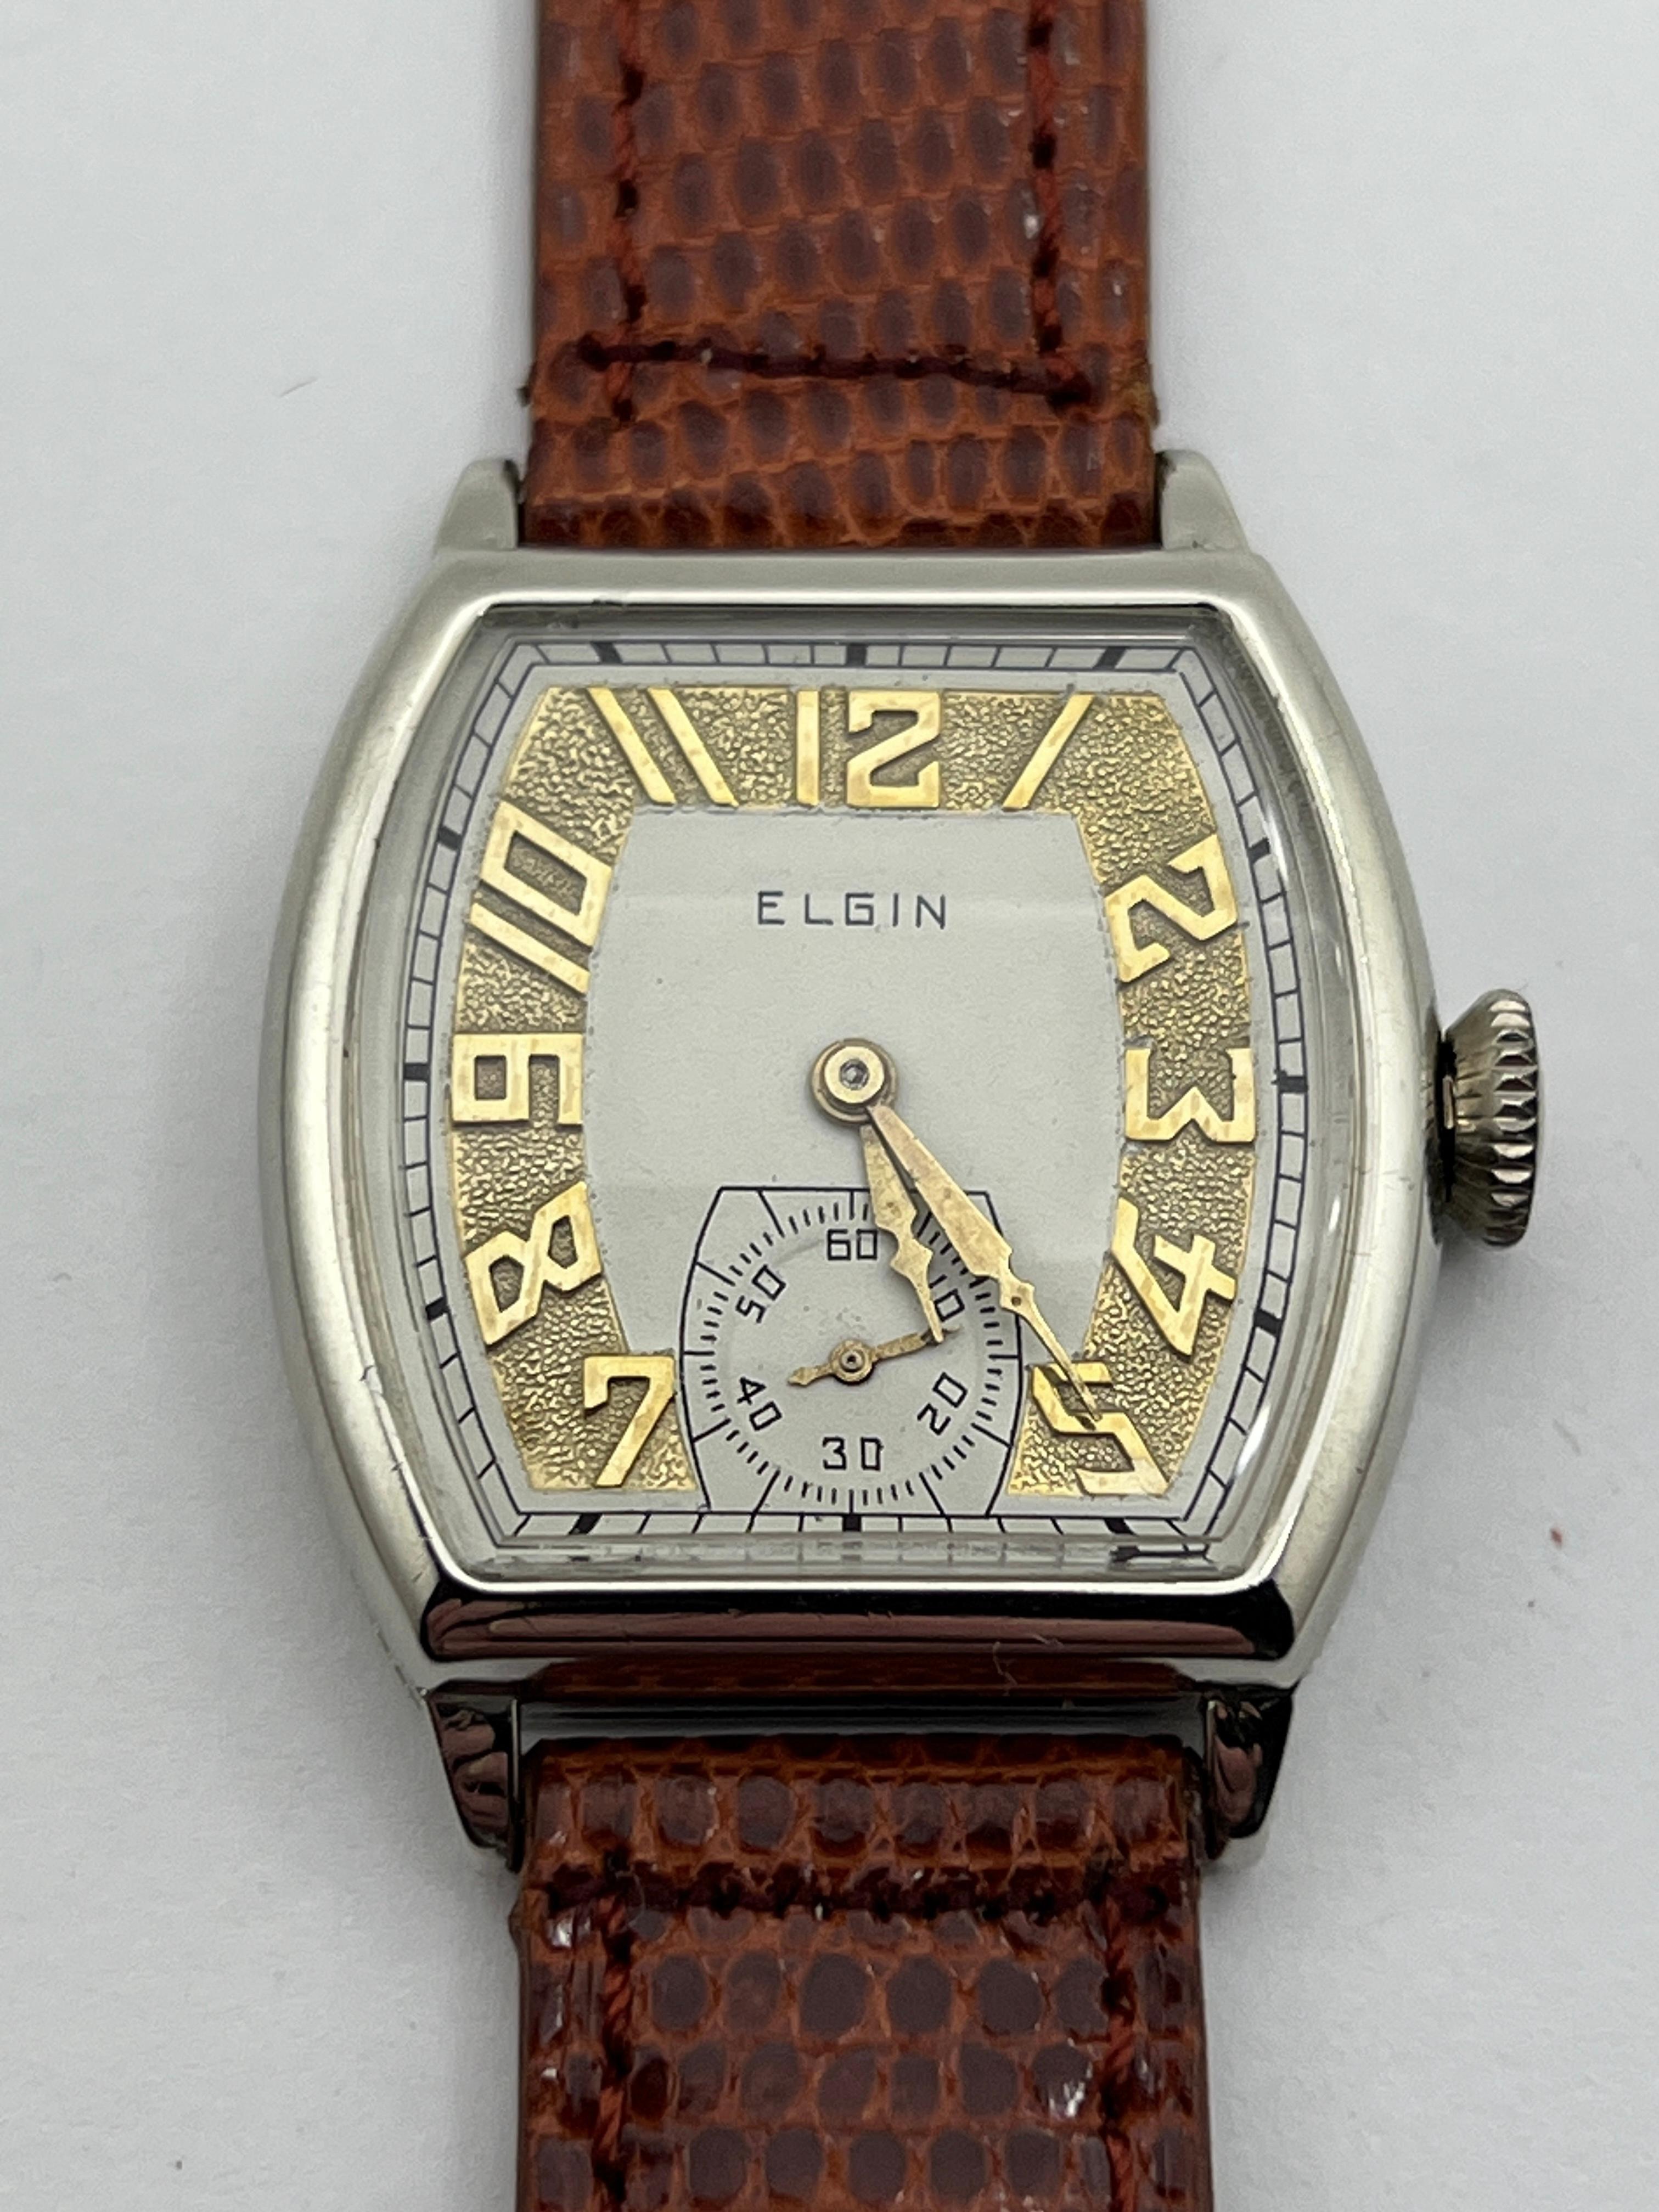 Solid Gold 1930 Elgin Art Deco Watch with a Chased Bezel Restored 1